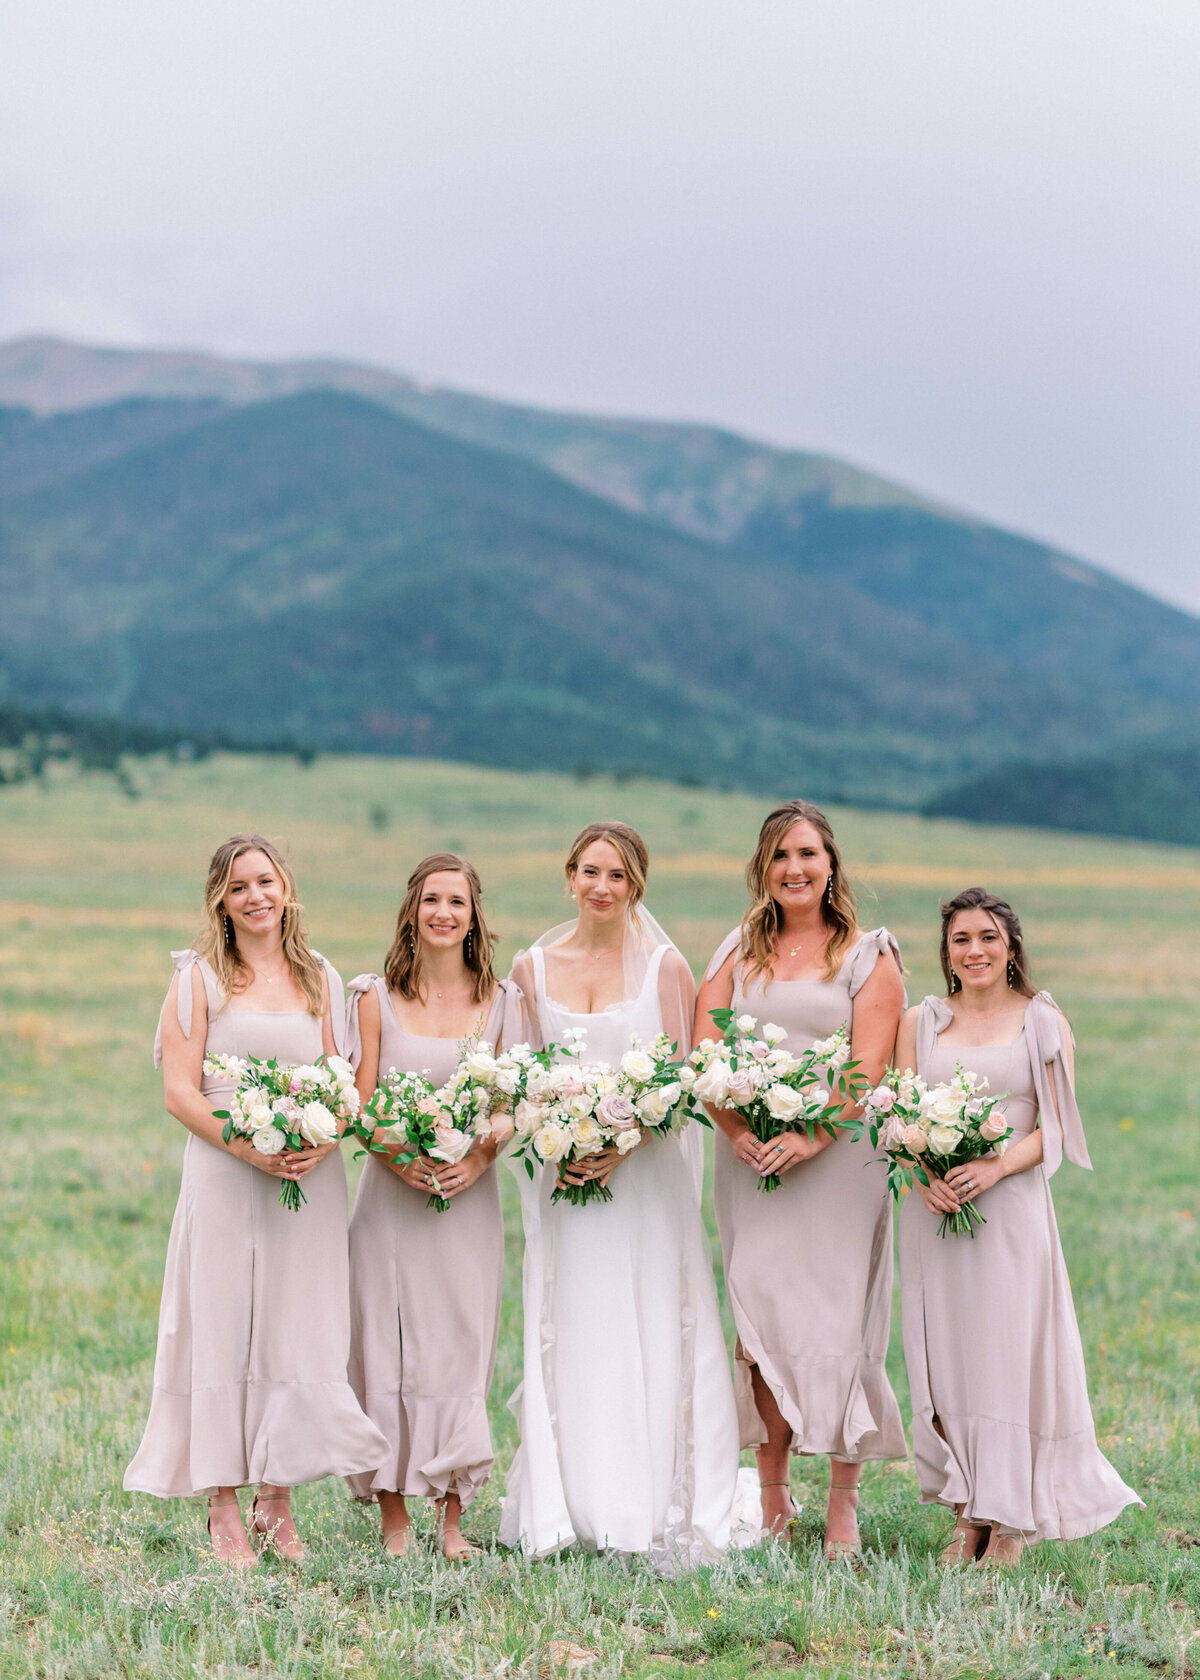 Wearing light mauve dresses, the bridesmaids complemented their pastel bouquets perfectly